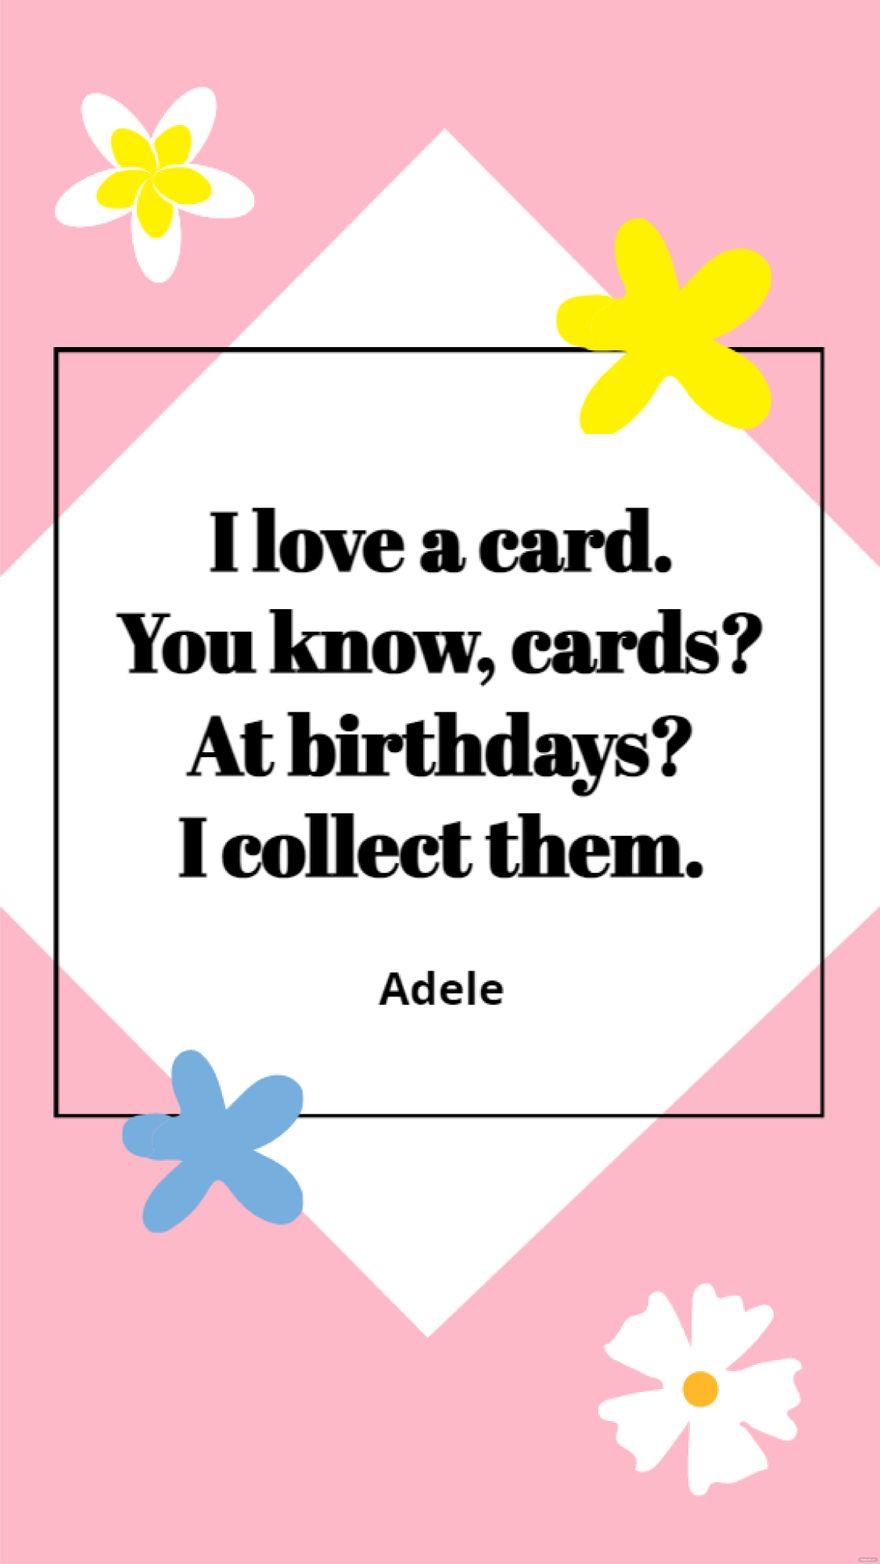 Free Adele - I love a card. You know, cards? At birthdays? I collect them.